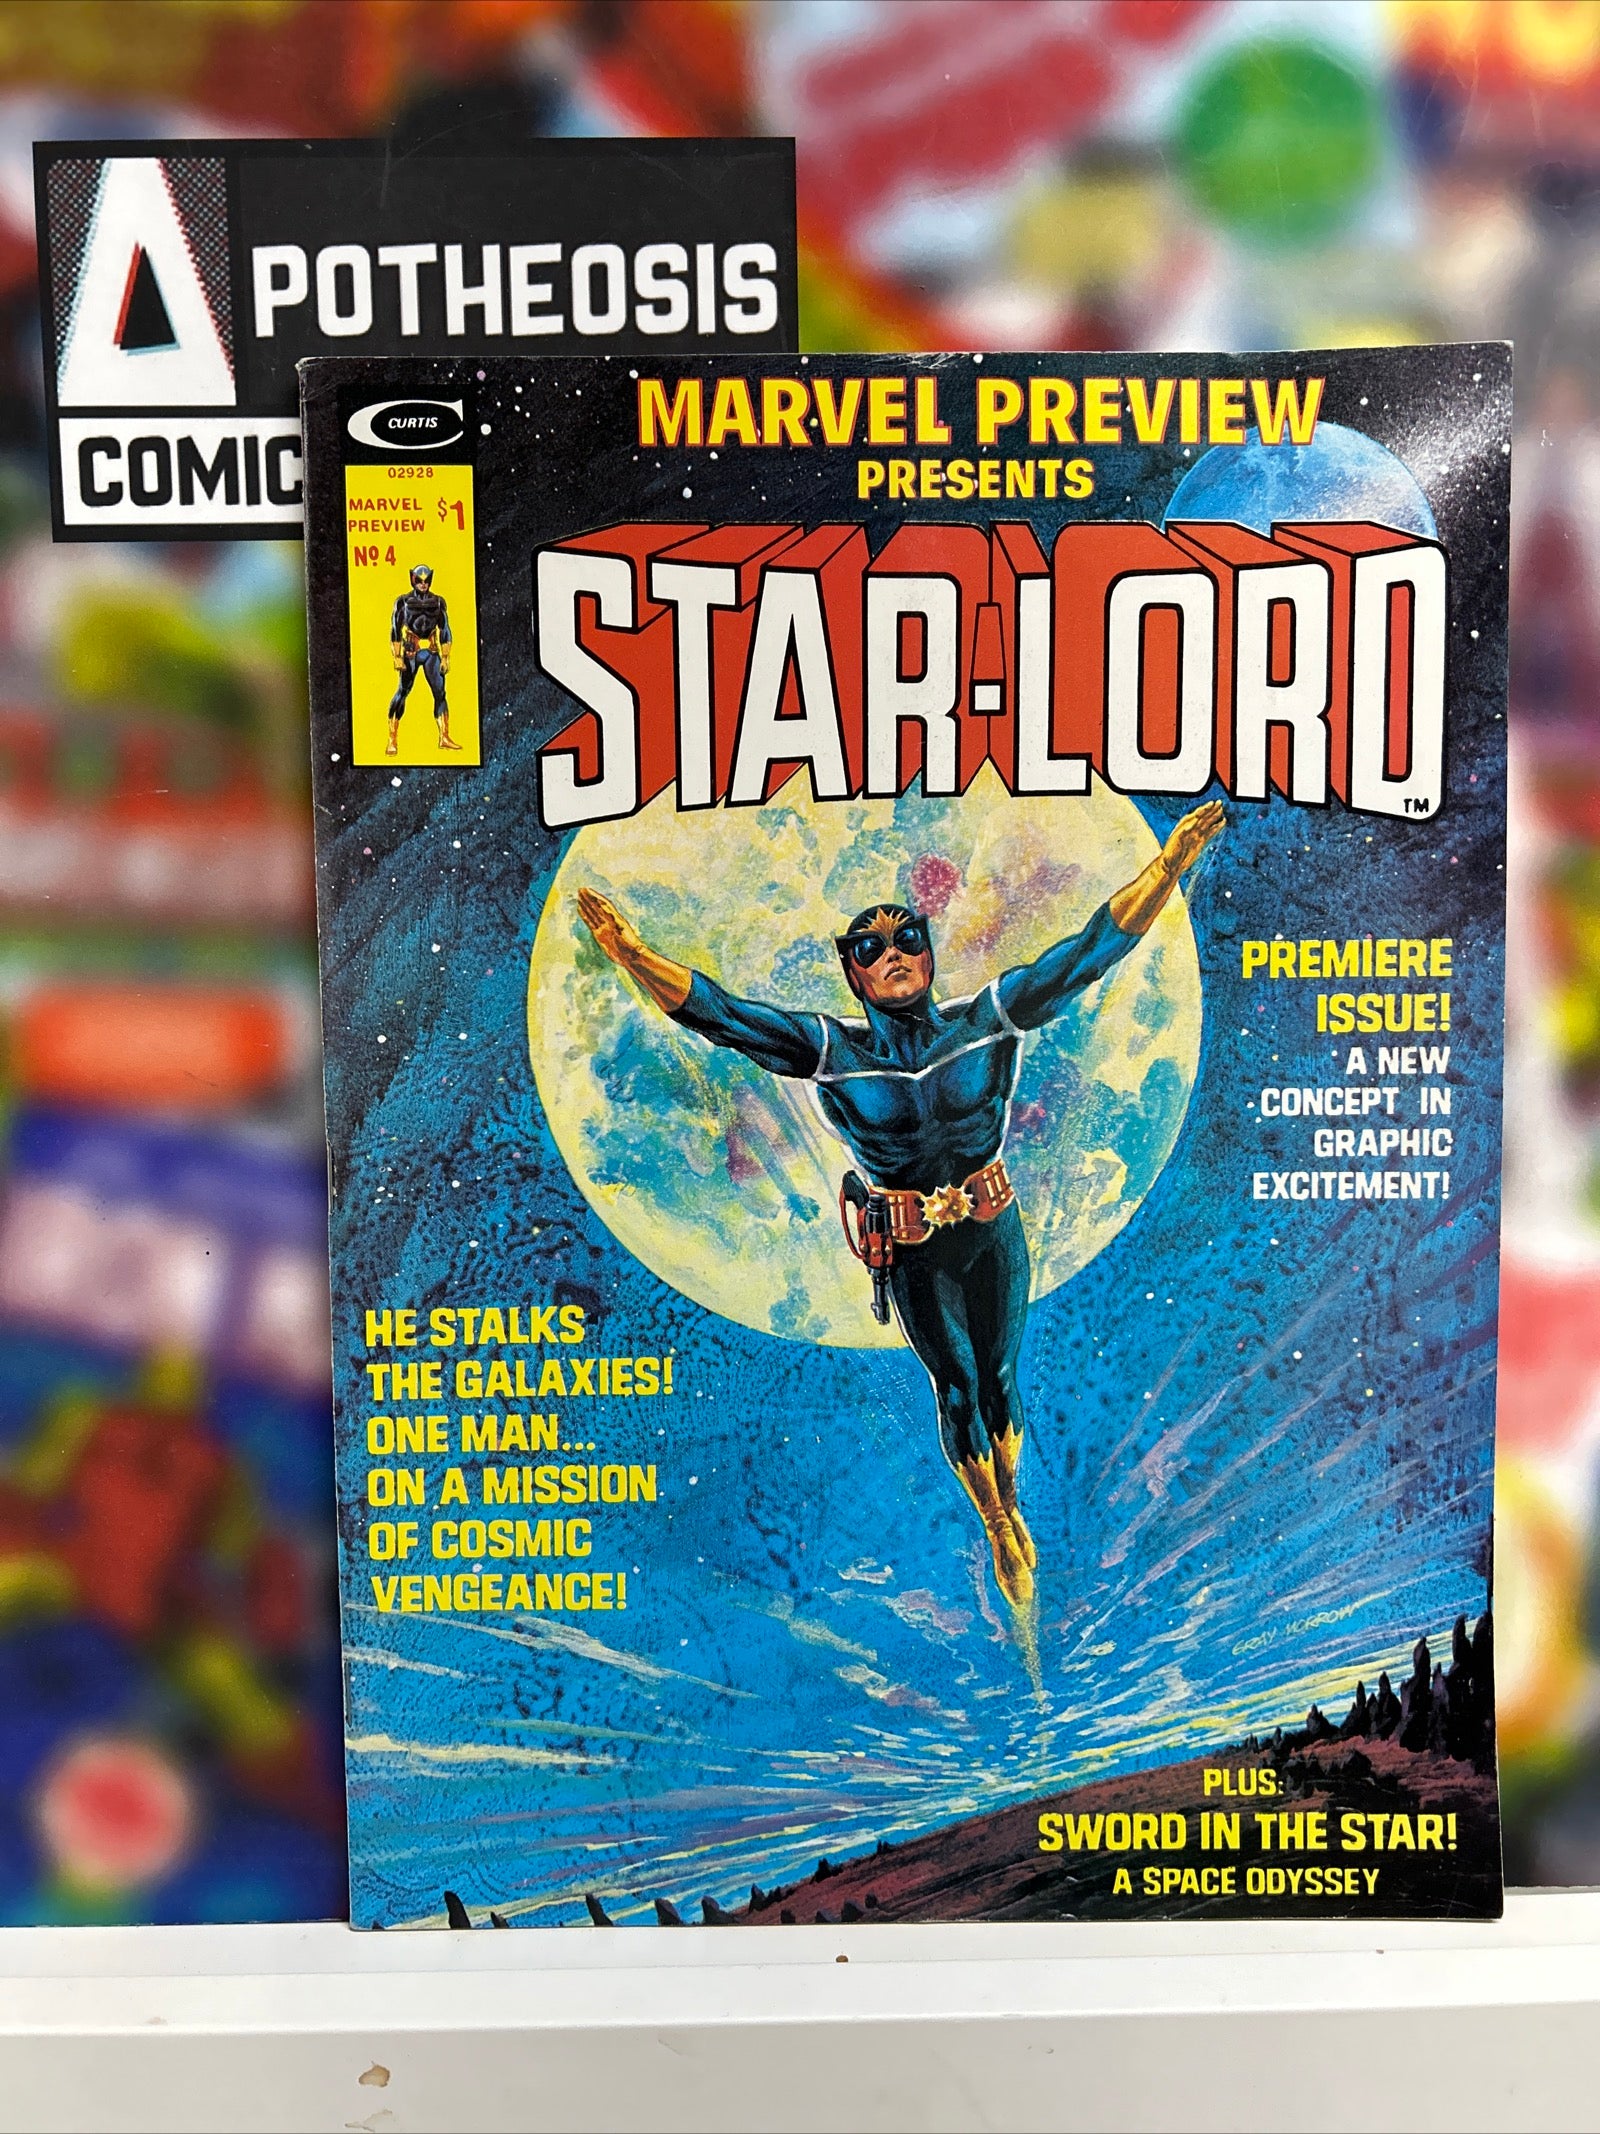 Marvel Preview Presents: Starlord (1st Starlord)